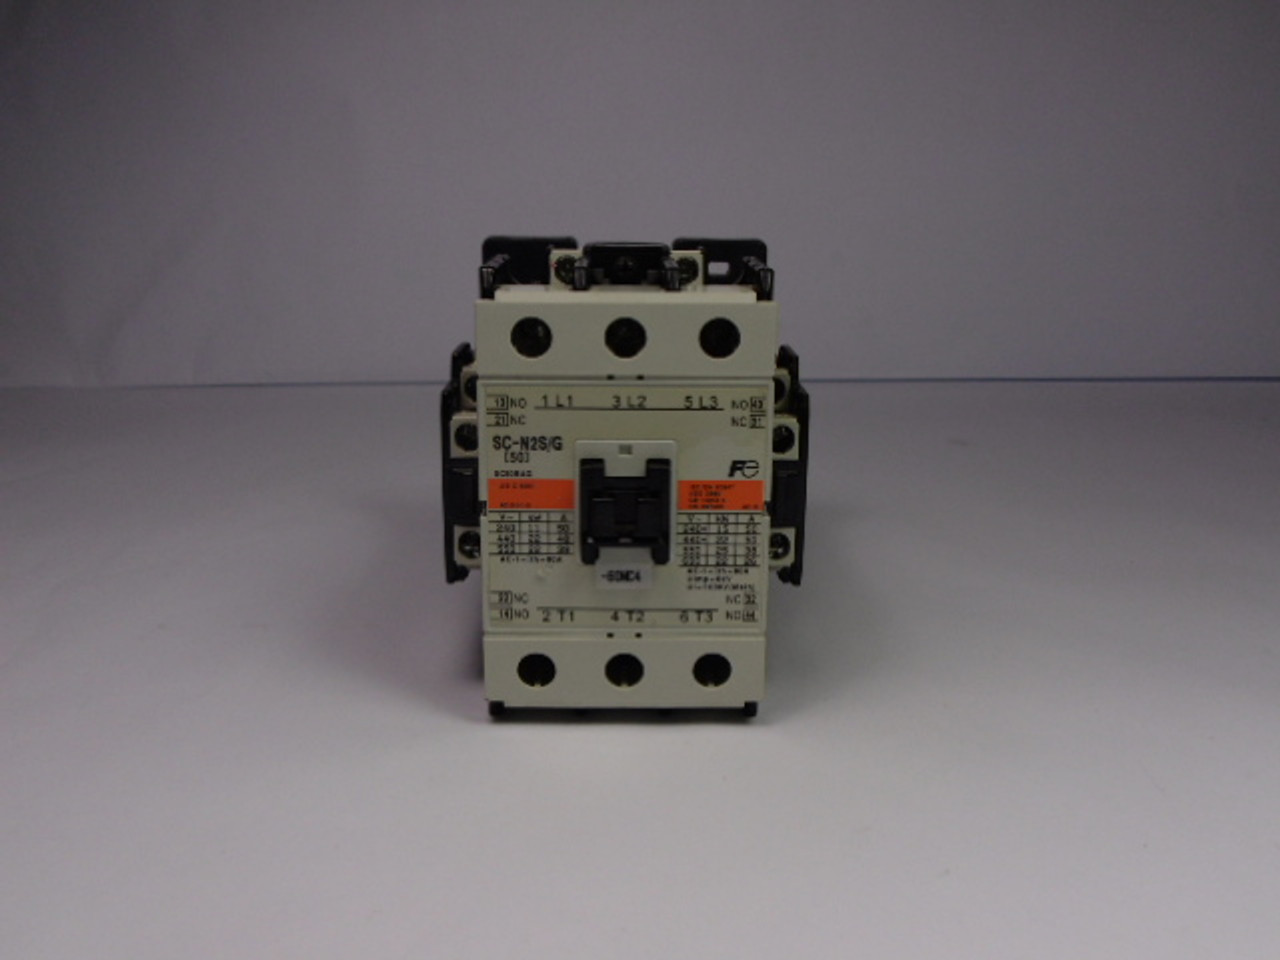 Fuji Electric SC-N2S/G Contactor 80Amp 2NO 2NC USED